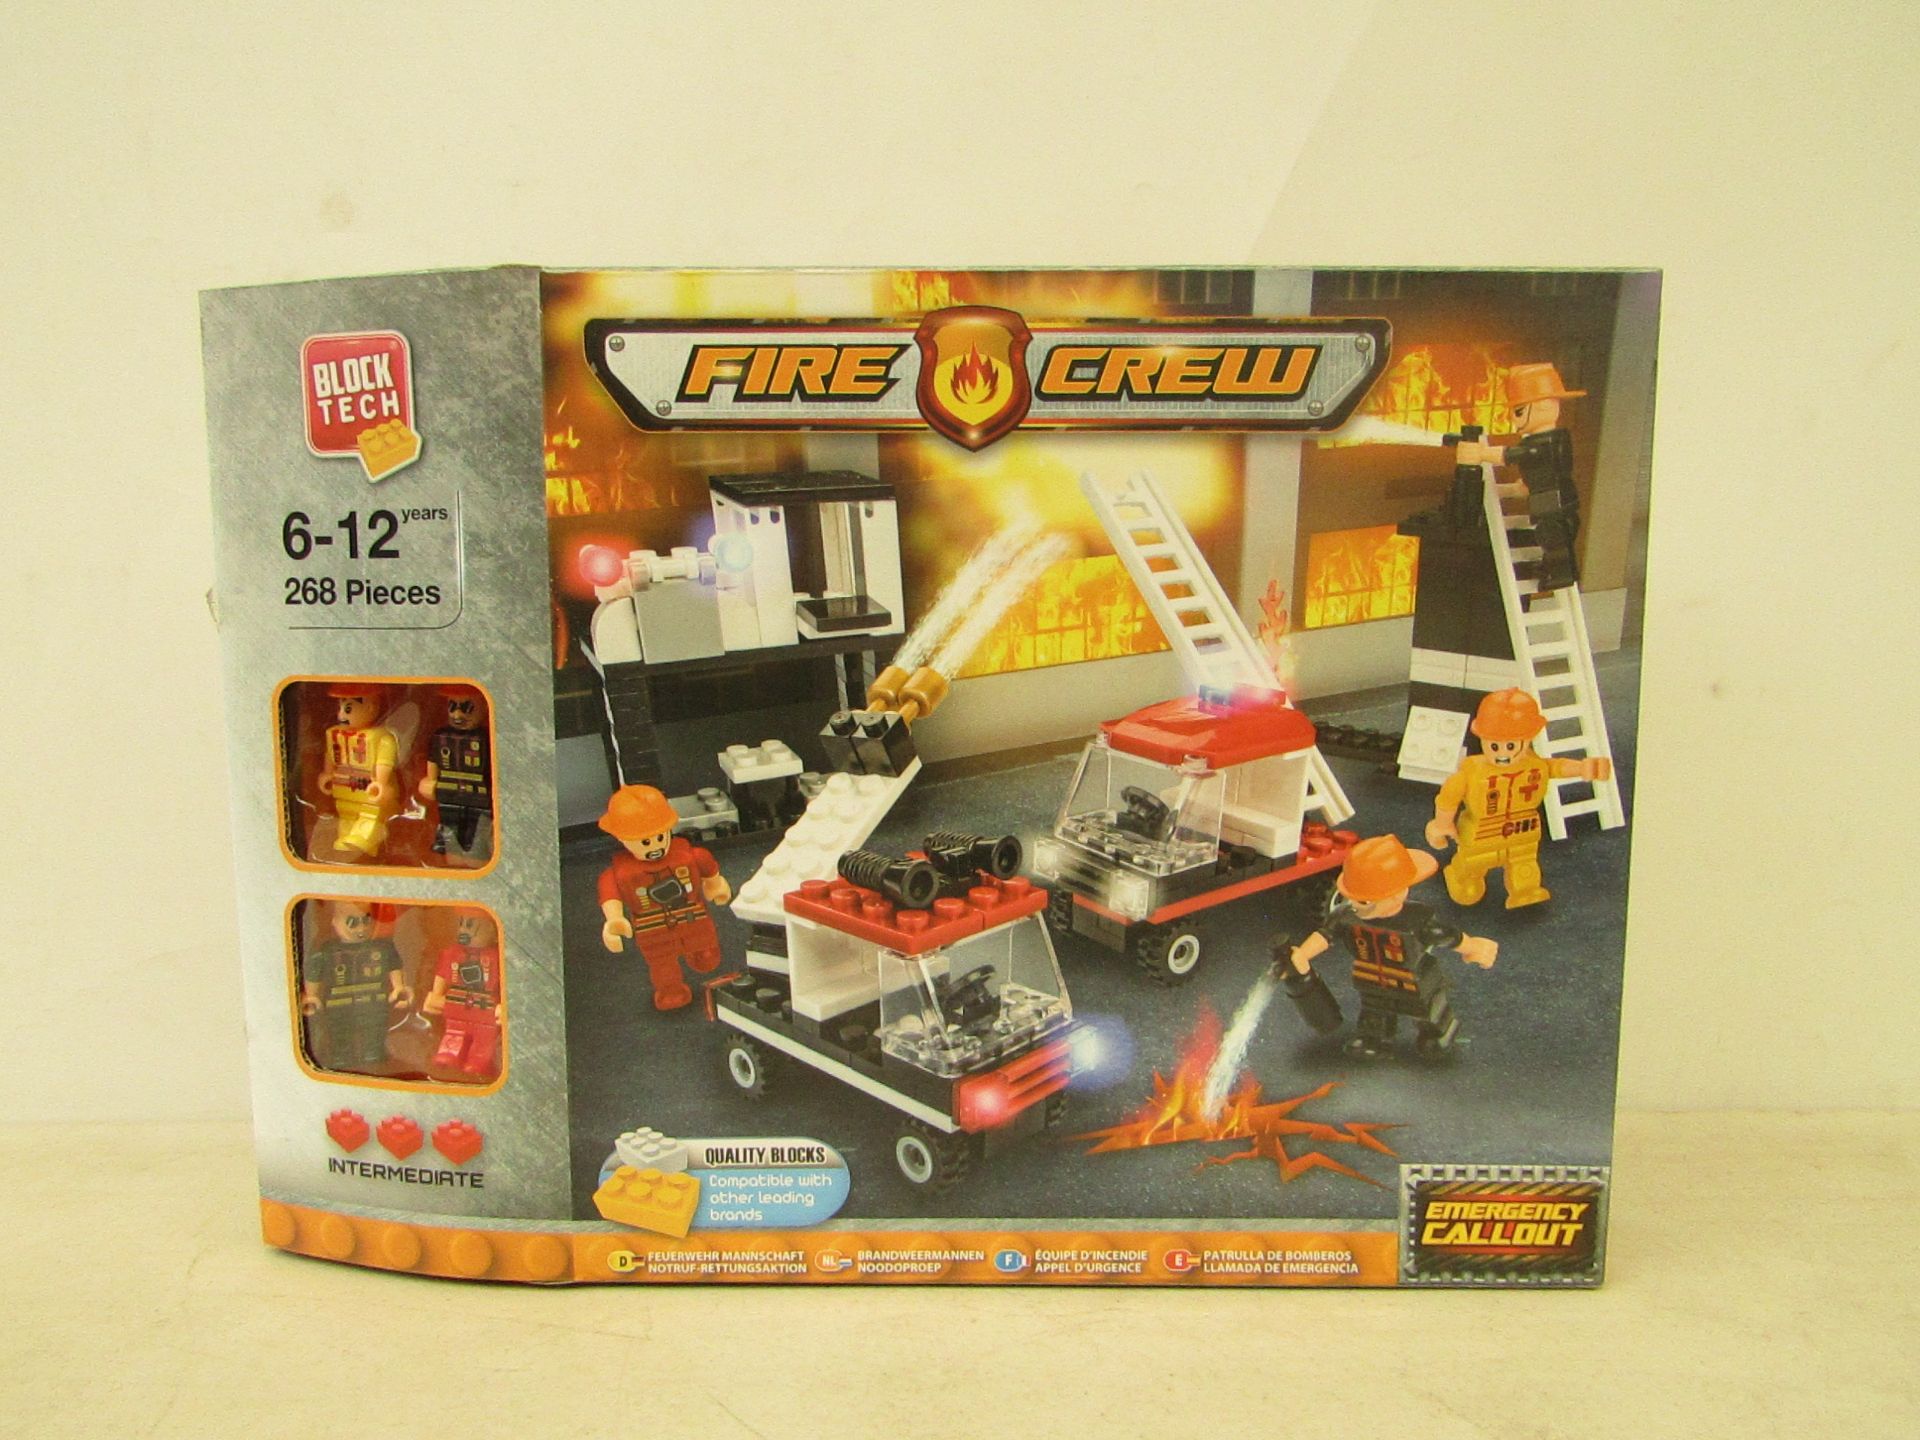 Block tech fire crew set, 268 pcs, age 6-12, new and boxed.